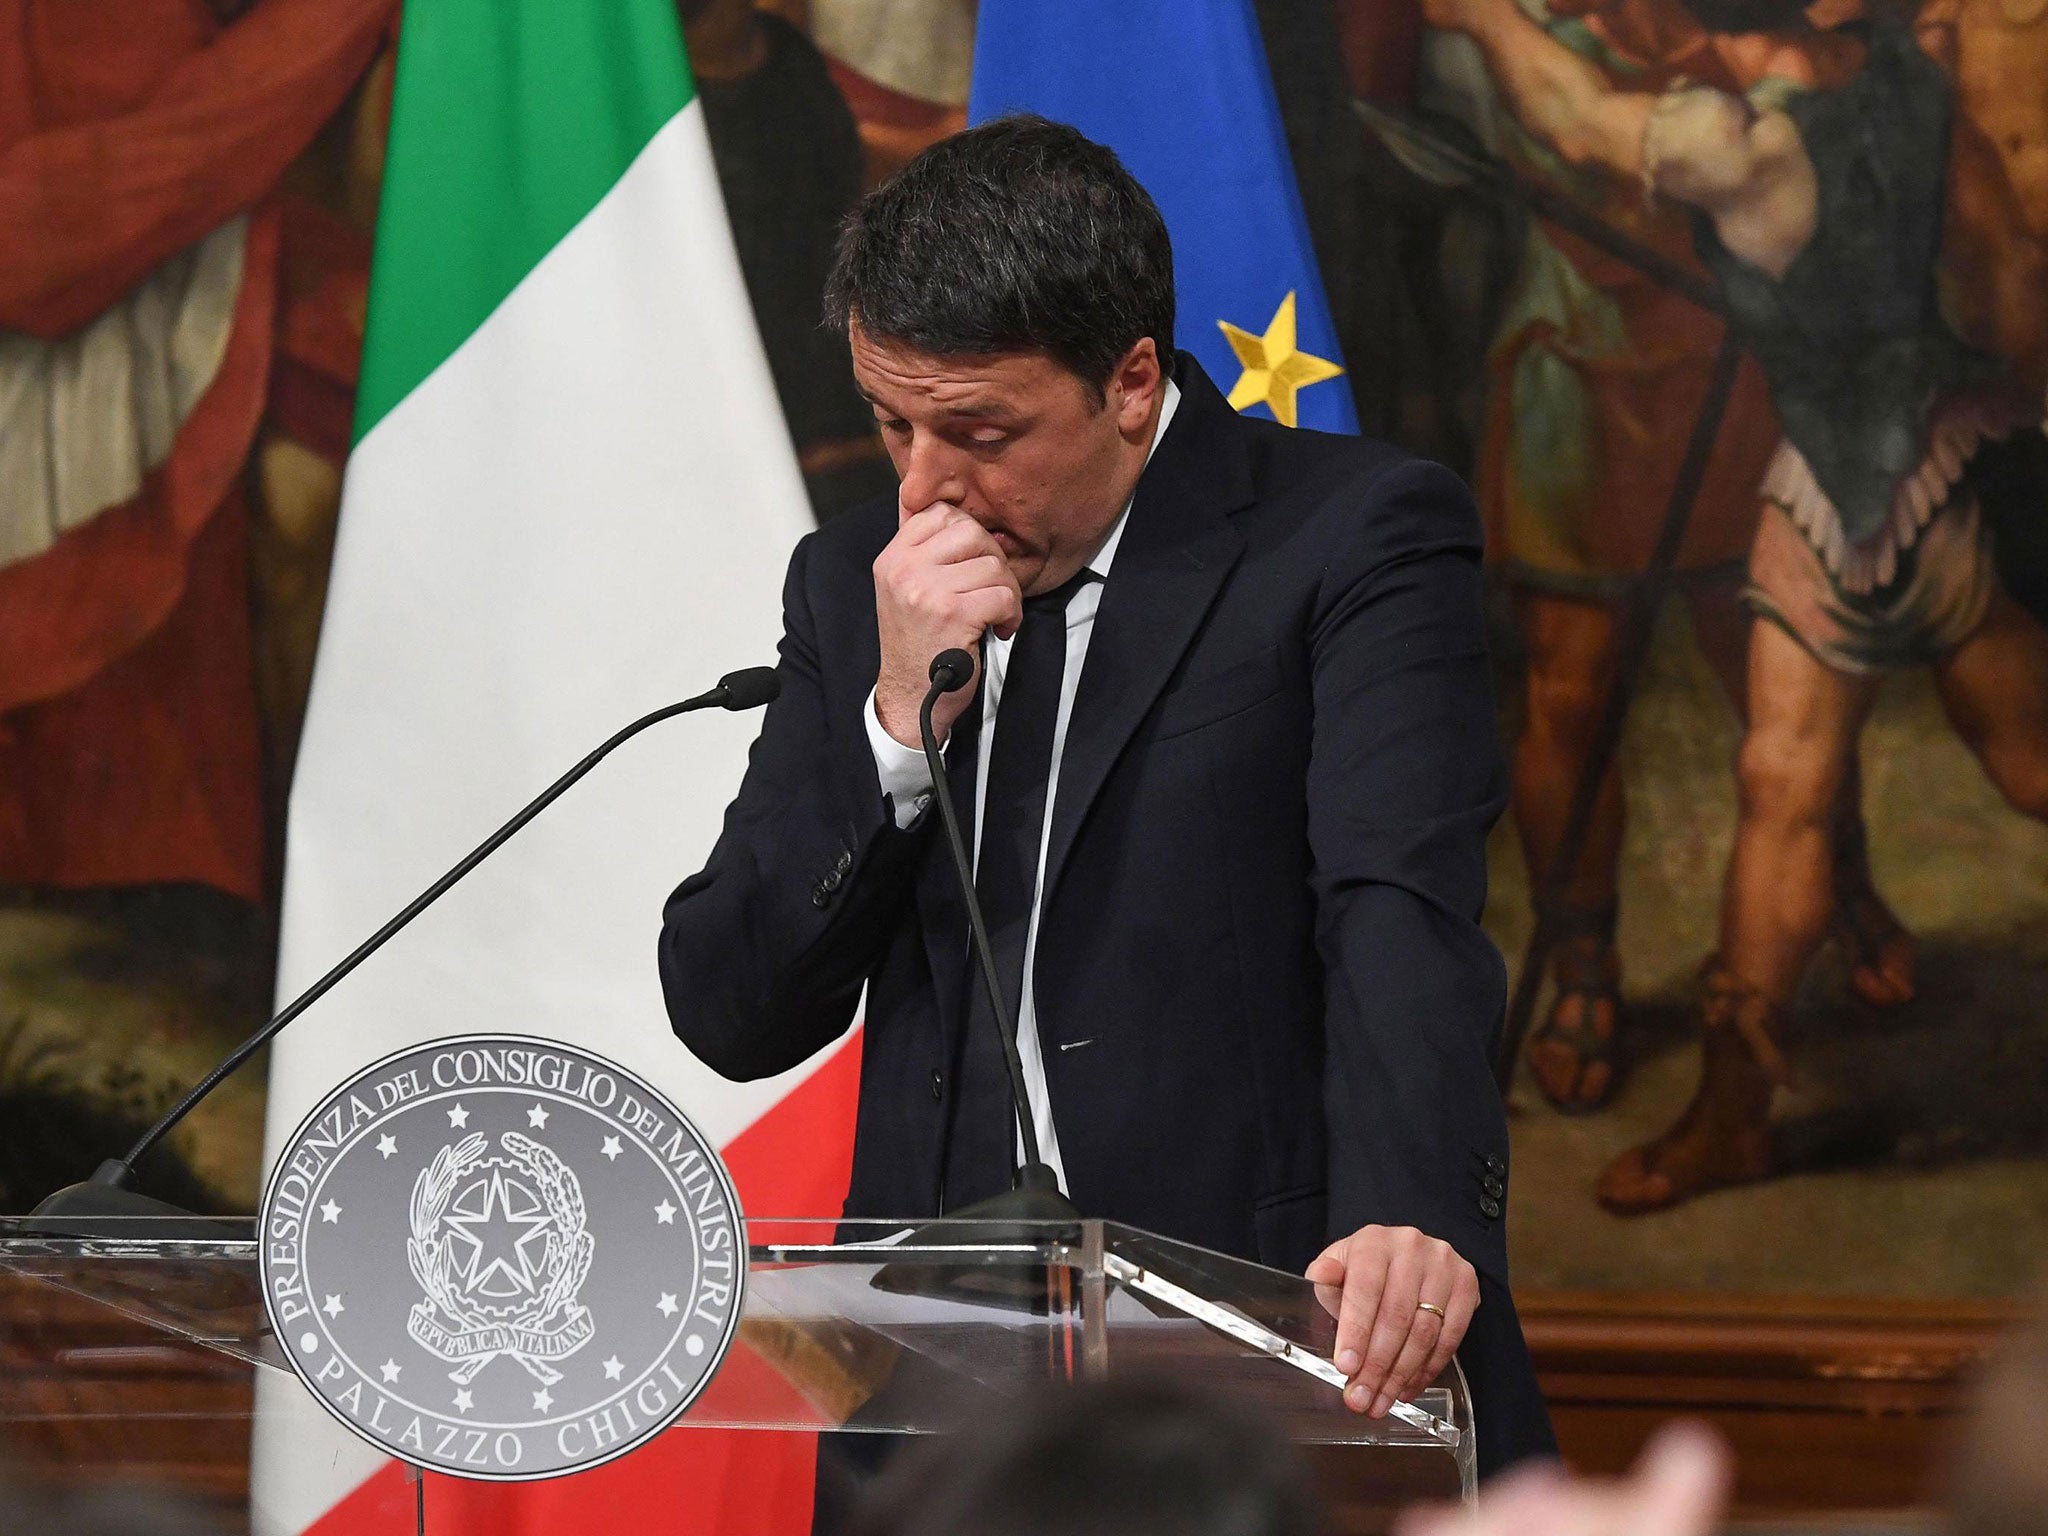 Outgoing Italian PM Matteo Renzi has agreed to stay in power until the Senate passes its 2017 budget in the coming days,